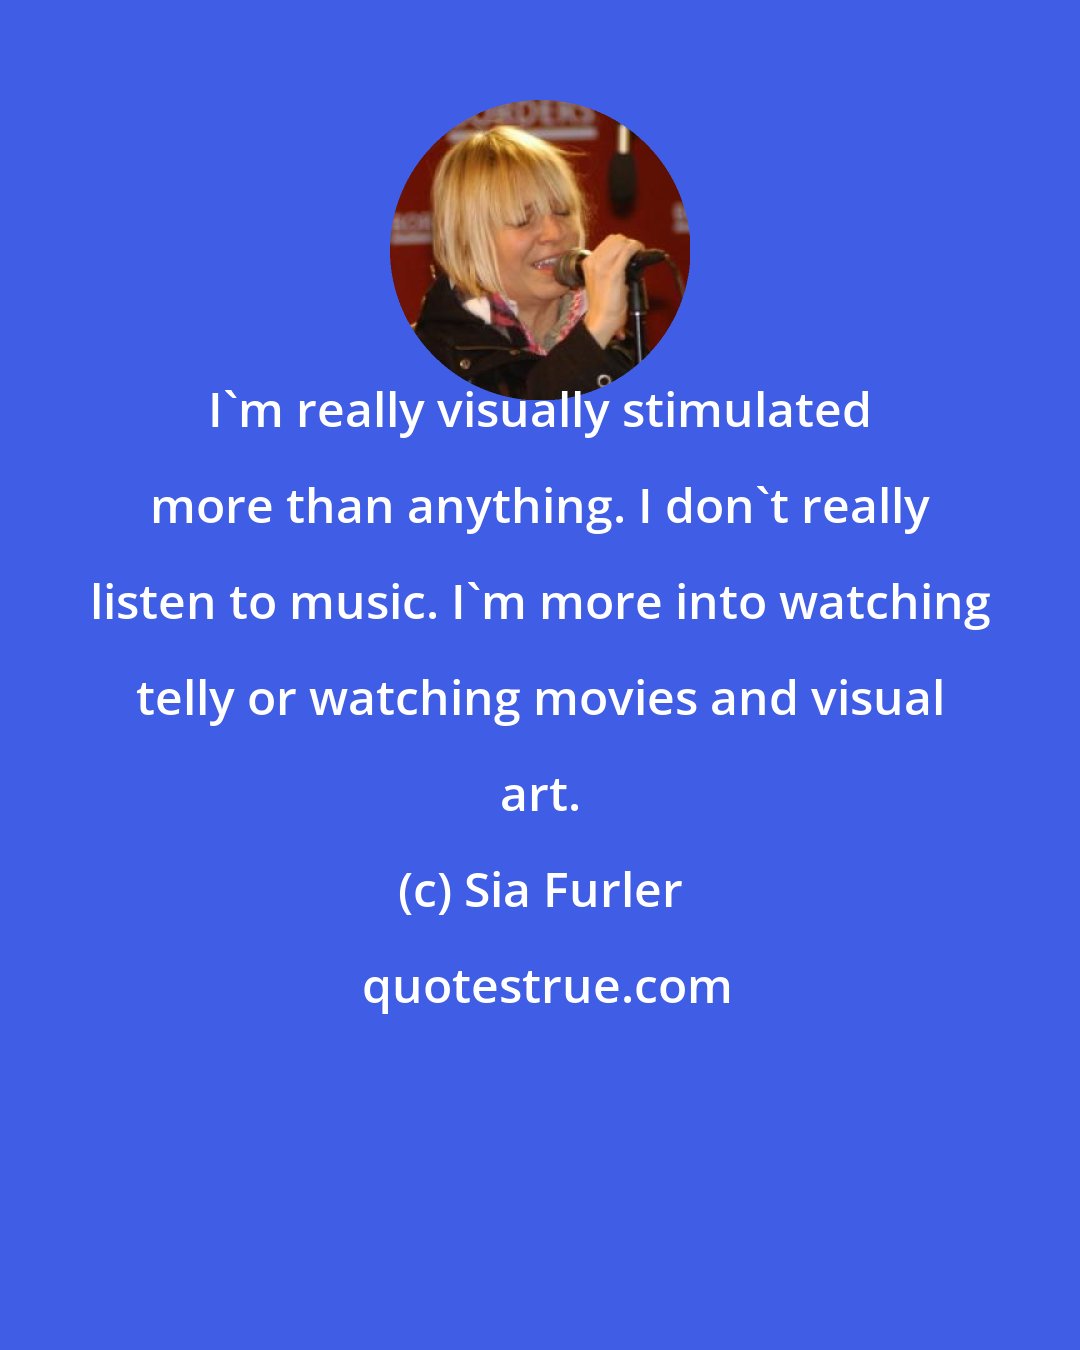 Sia Furler: I'm really visually stimulated more than anything. I don't really listen to music. I'm more into watching telly or watching movies and visual art.